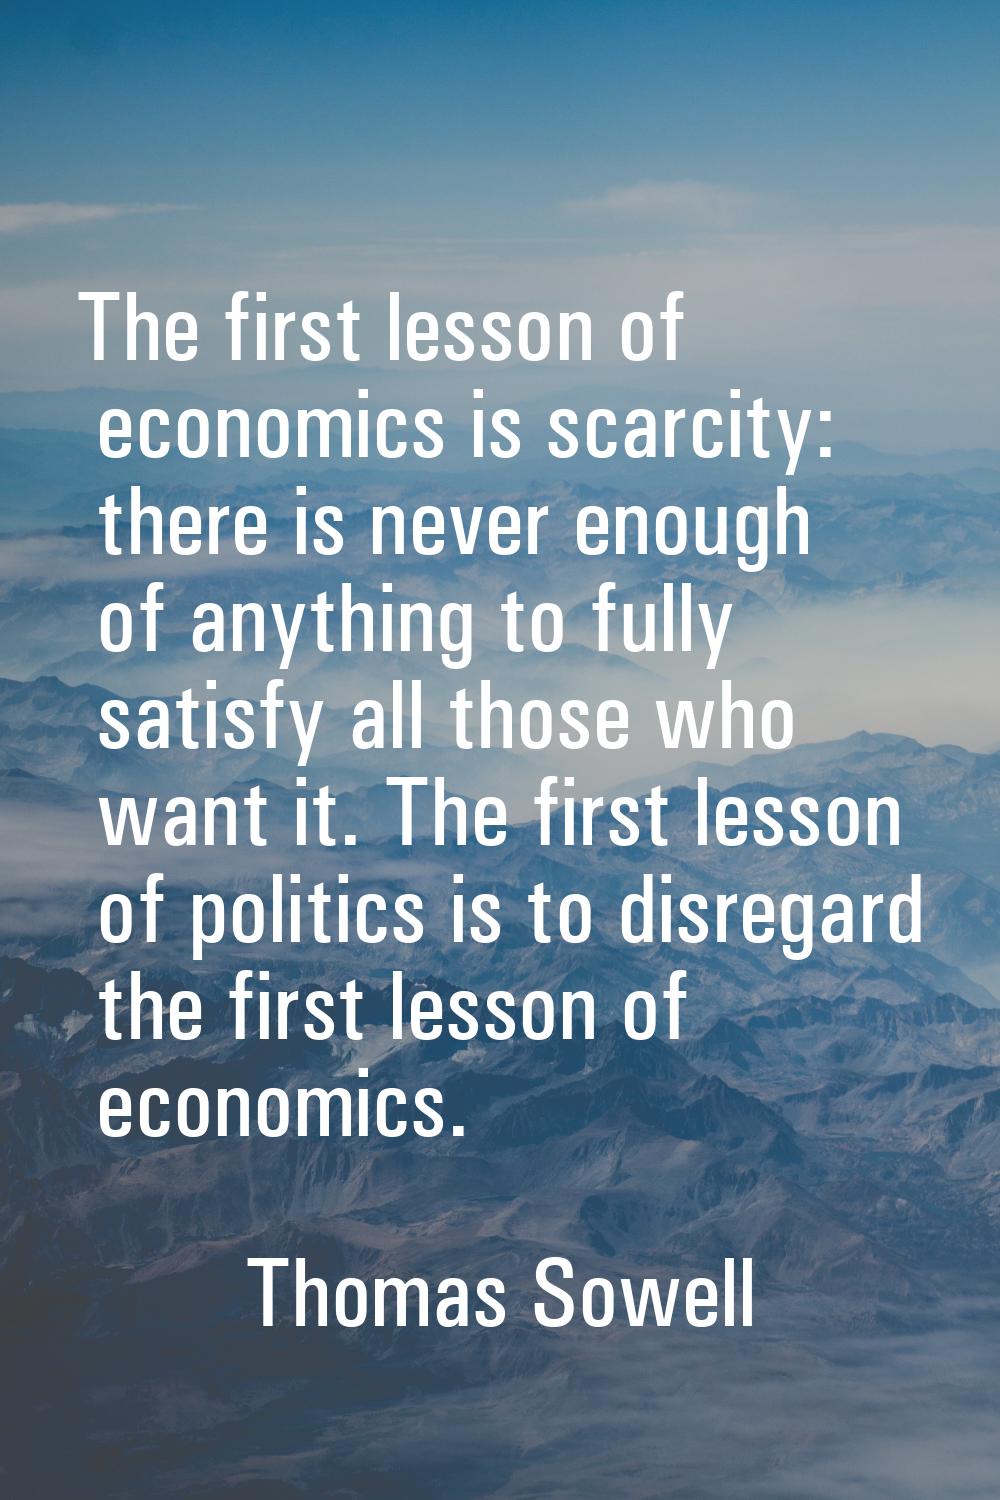 The first lesson of economics is scarcity: there is never enough of anything to fully satisfy all t